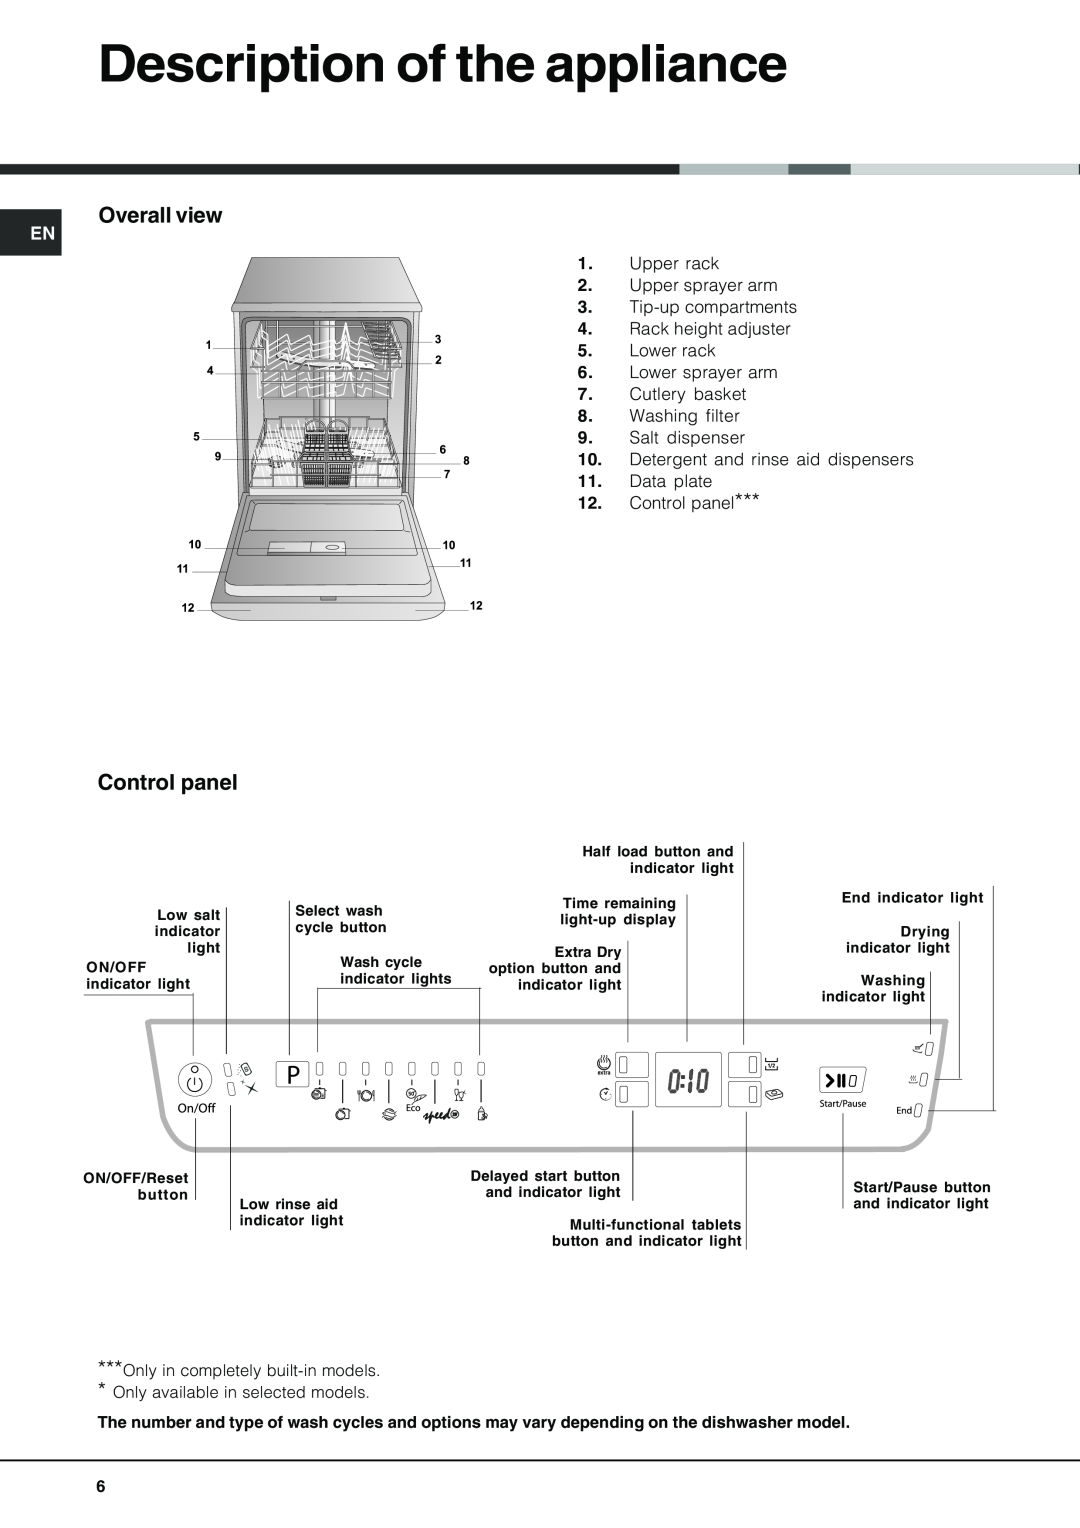 Hotpoint FDPF 481 manual Description of the appliance, Overall view, Control panel 